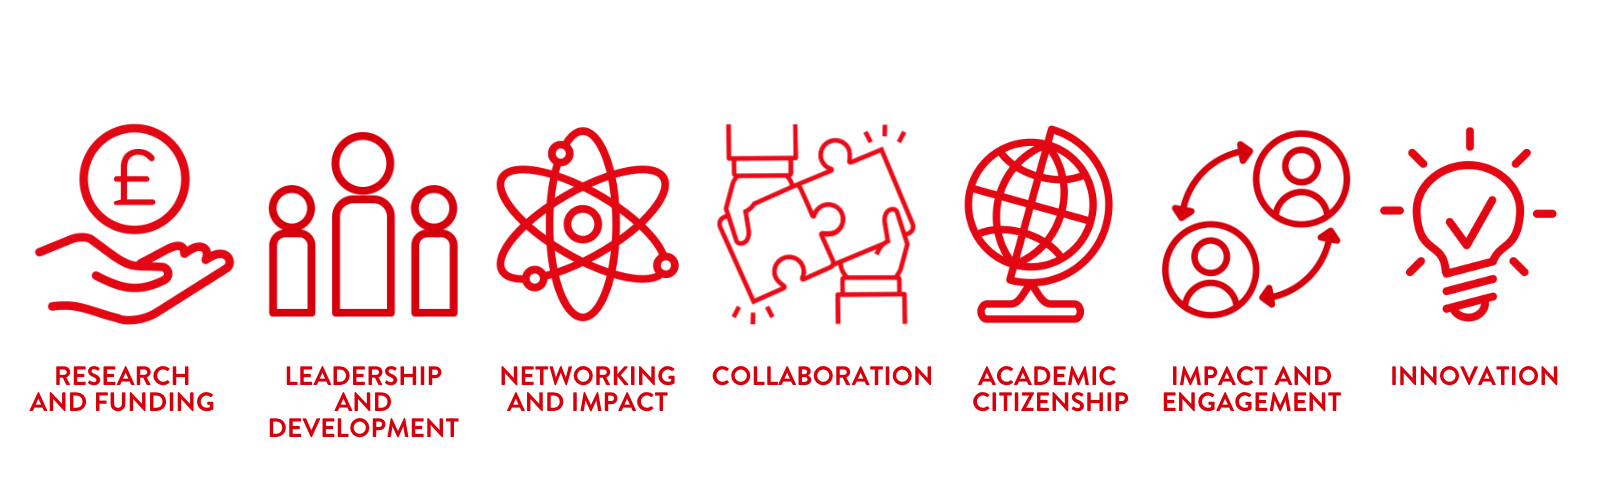 Image shows icons depicting the main strands of the Fellowship Academy: Research and Funding, Leadership and Development, Networking and Impact, Collaboration, Academic Citizenship, Impact and Engagement, Innovation.